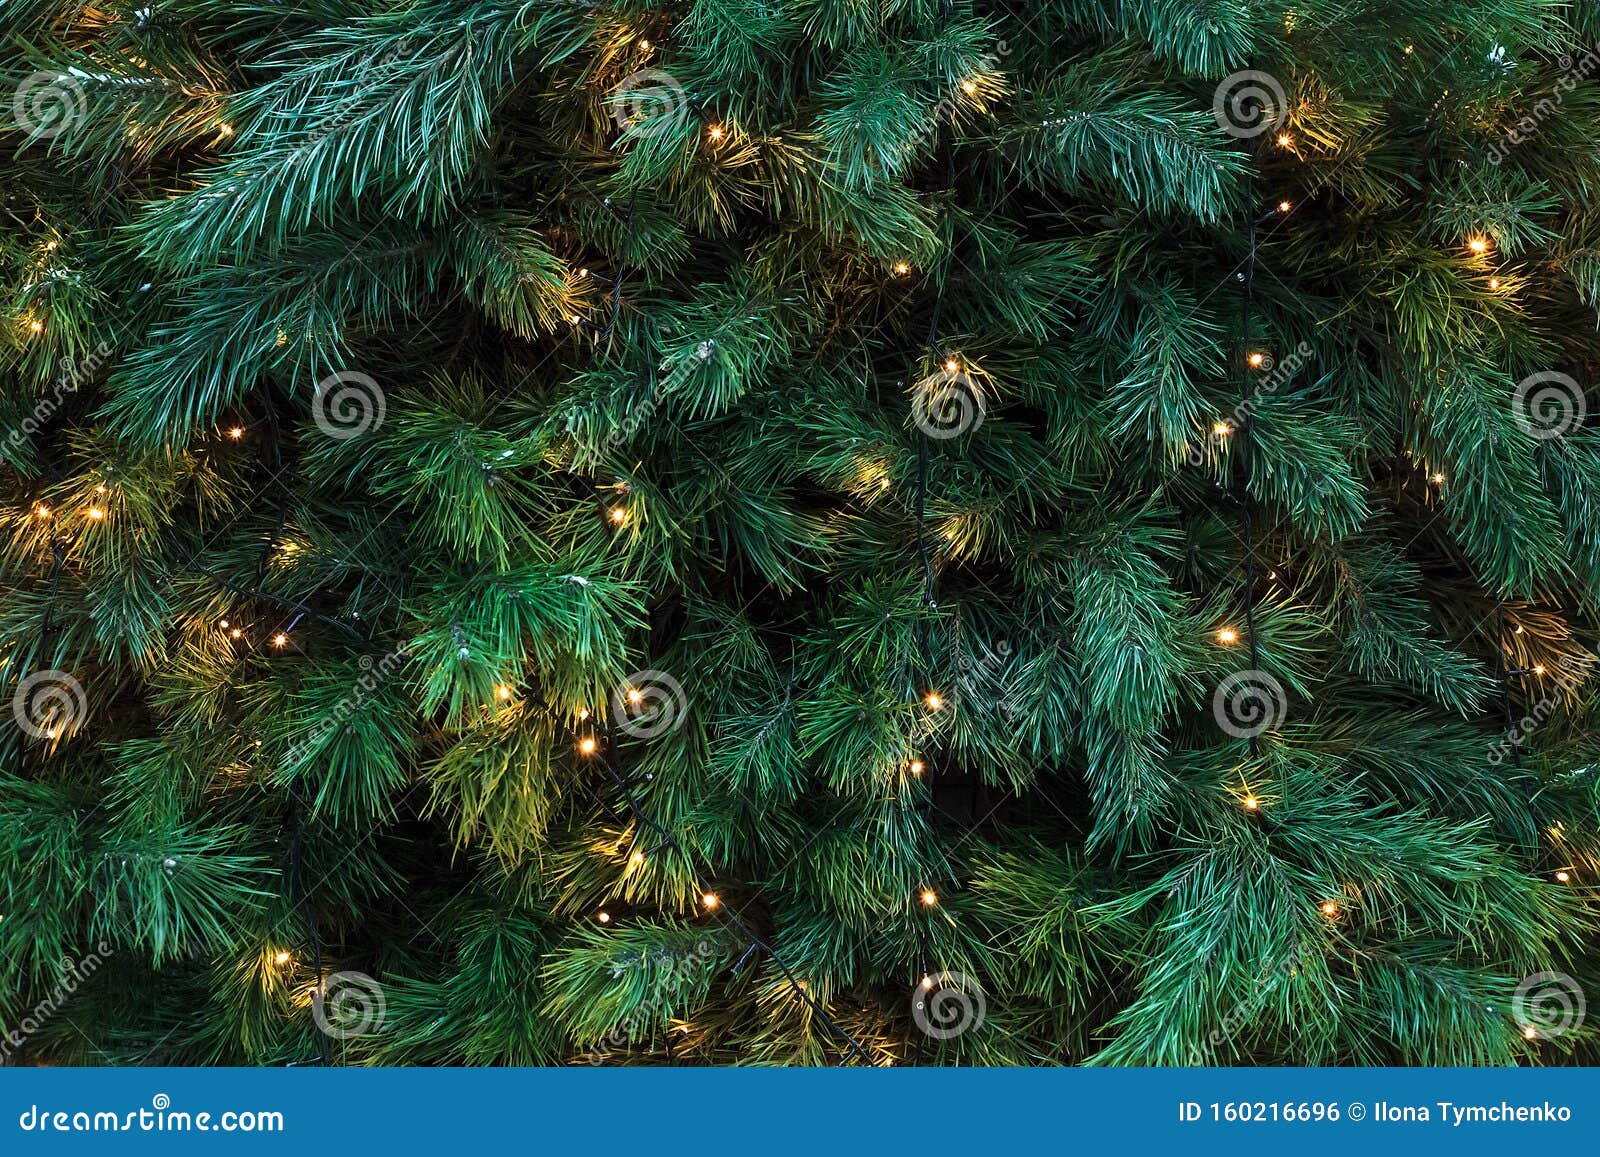 Pattern with Green Branches with Pine Illuminated Garlands Lights, Soft